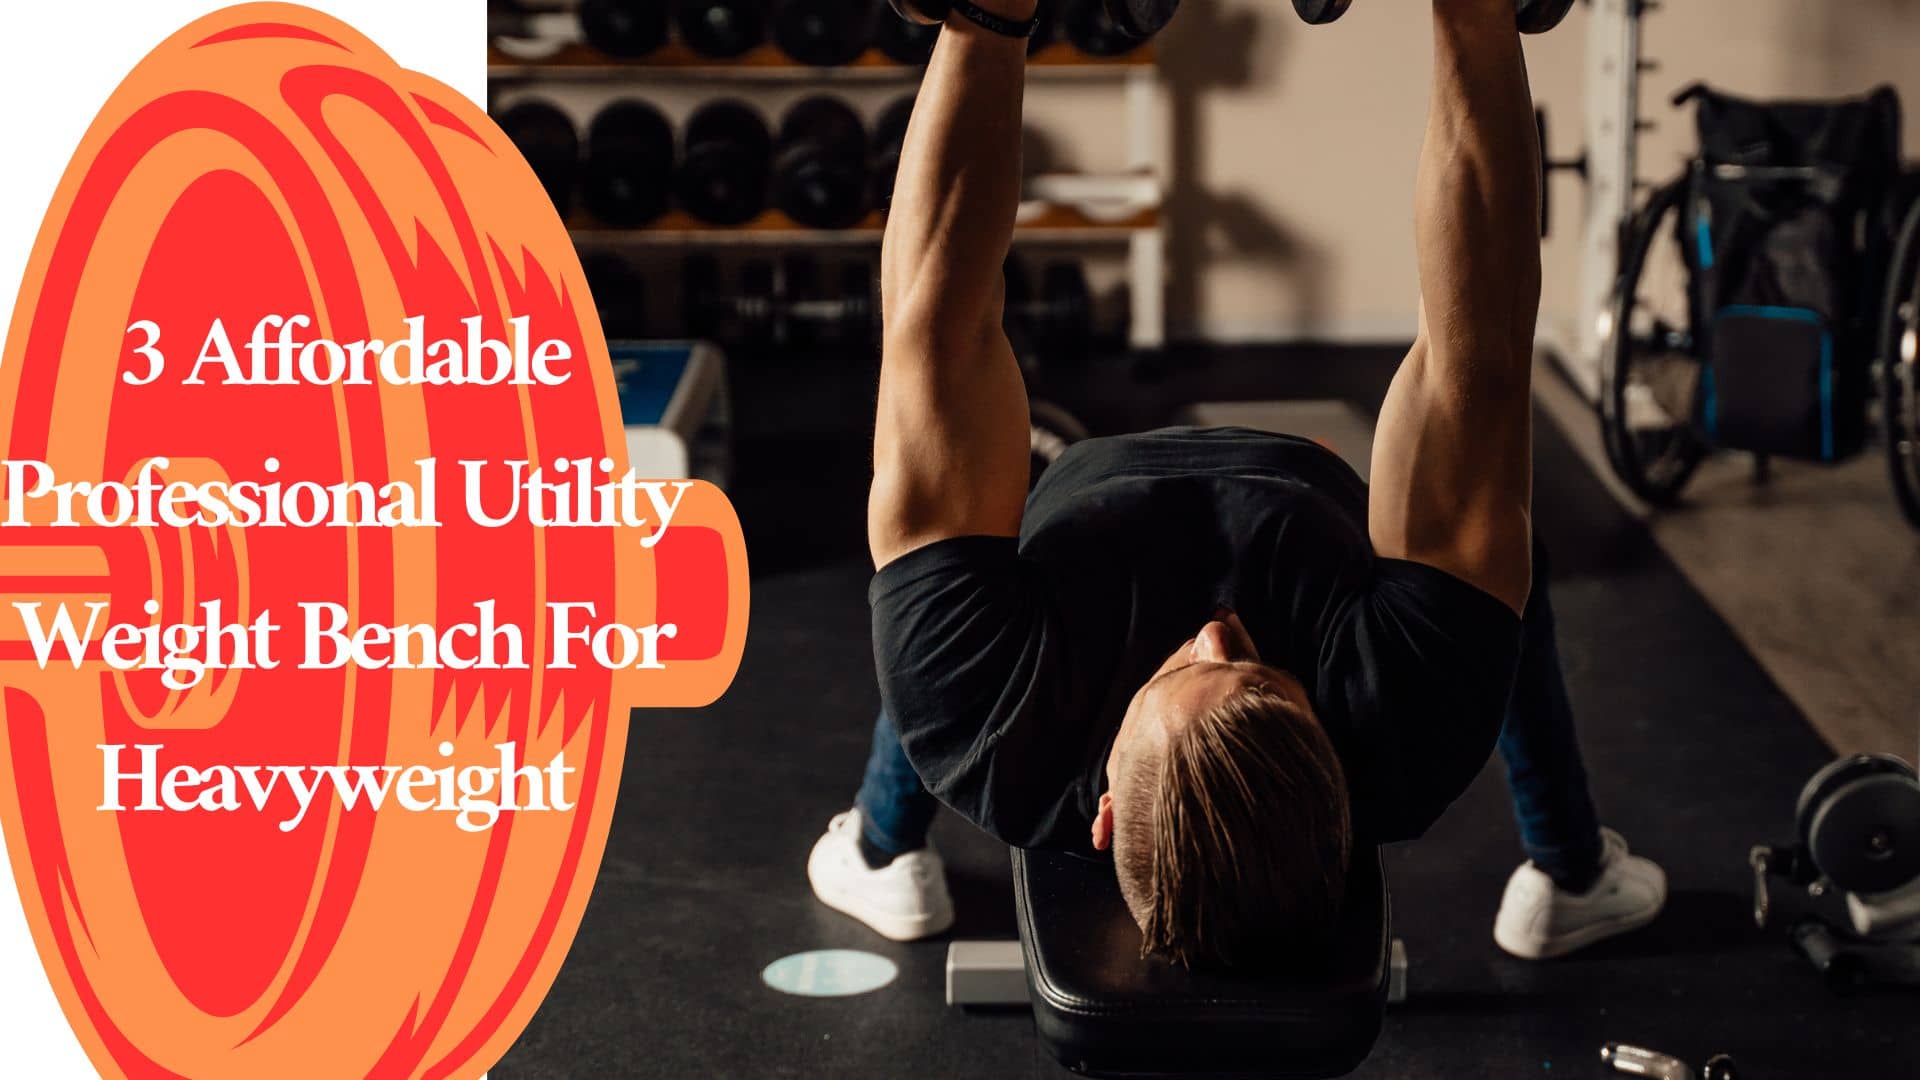 3 Affordable Professional Utility Weight Bench For Heavyweight